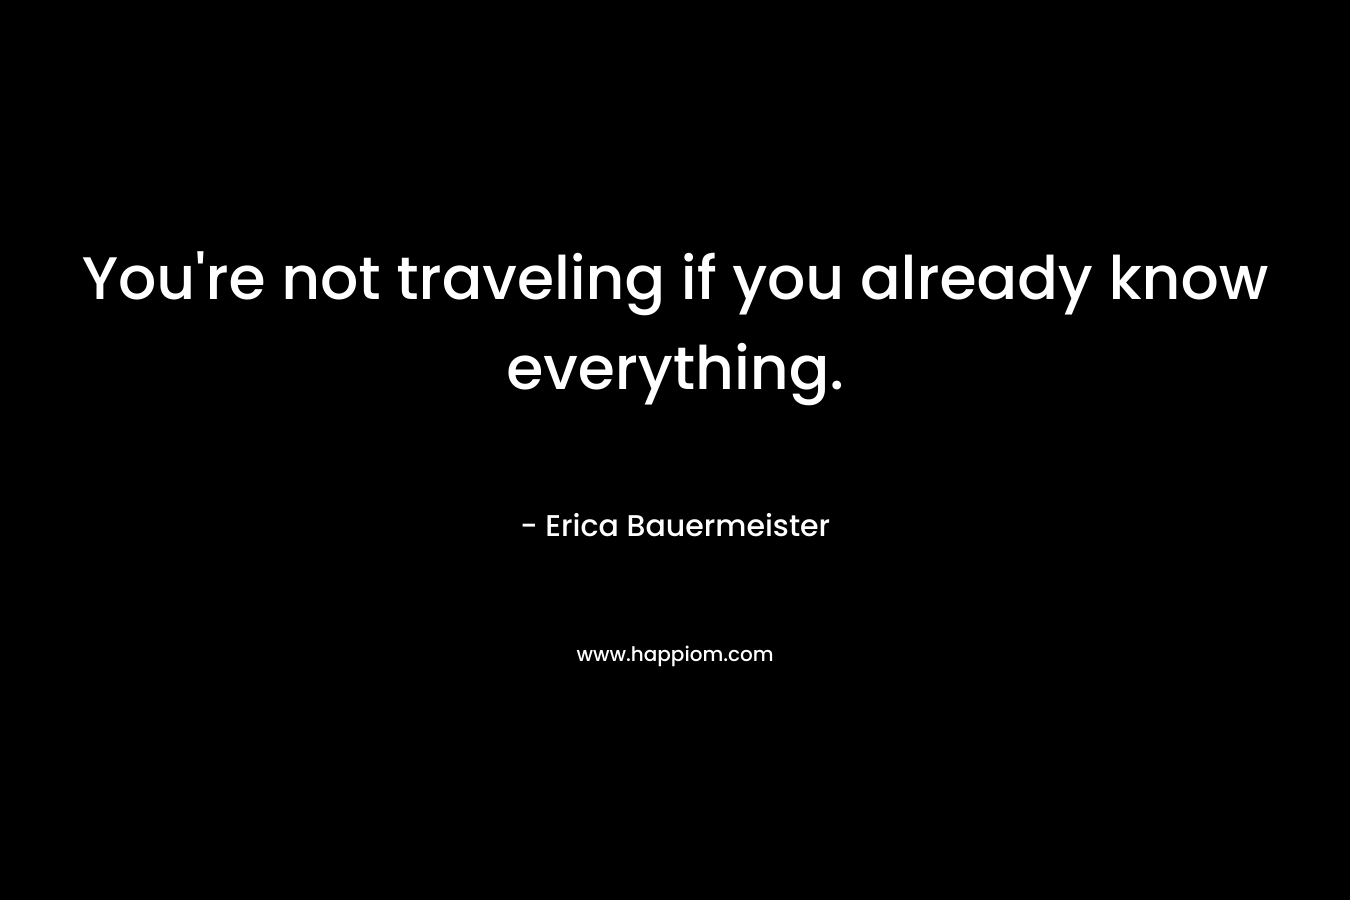 You’re not traveling if you already know everything. – Erica Bauermeister